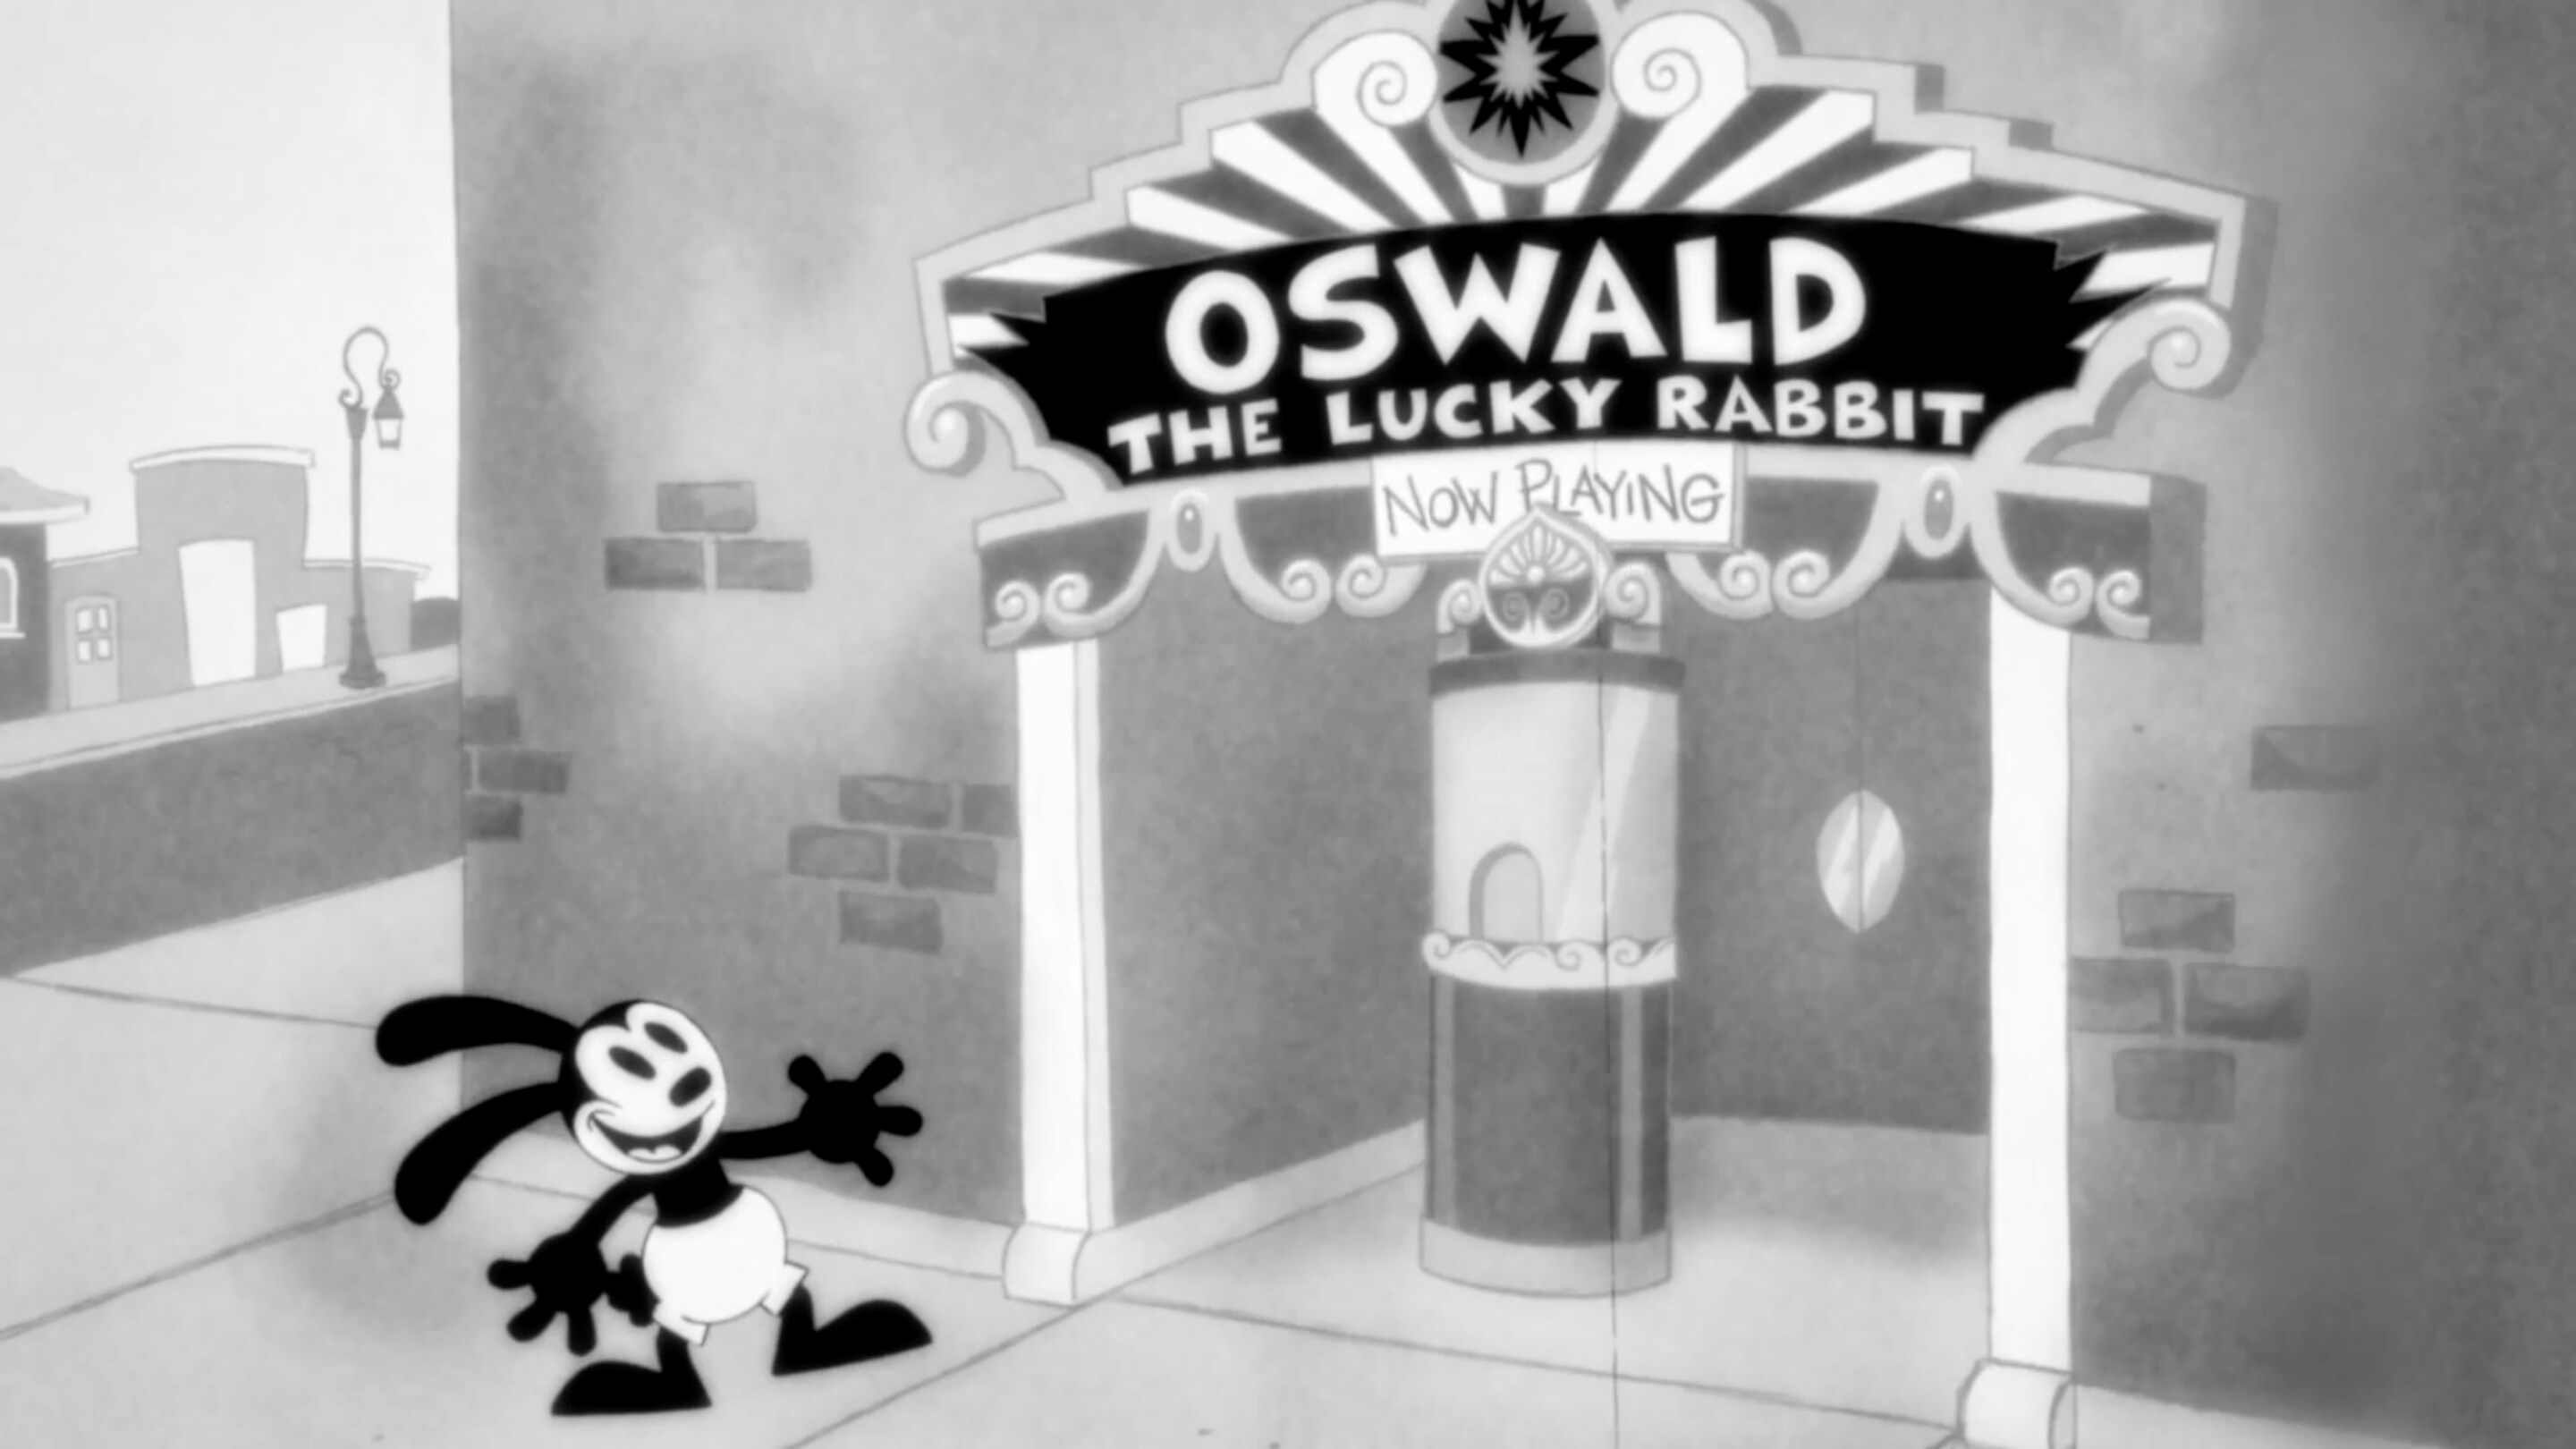 FOR THE FIRST TIME IN NEARLY 95 YEARS, OSWALD THE LUCKY RABBIT STARS IN AN ALL-NEW WALT DISNEY ANIMATION STUDIOS SHORT TO CELEBRATE DISNEY 100 YEARS OF WONDER